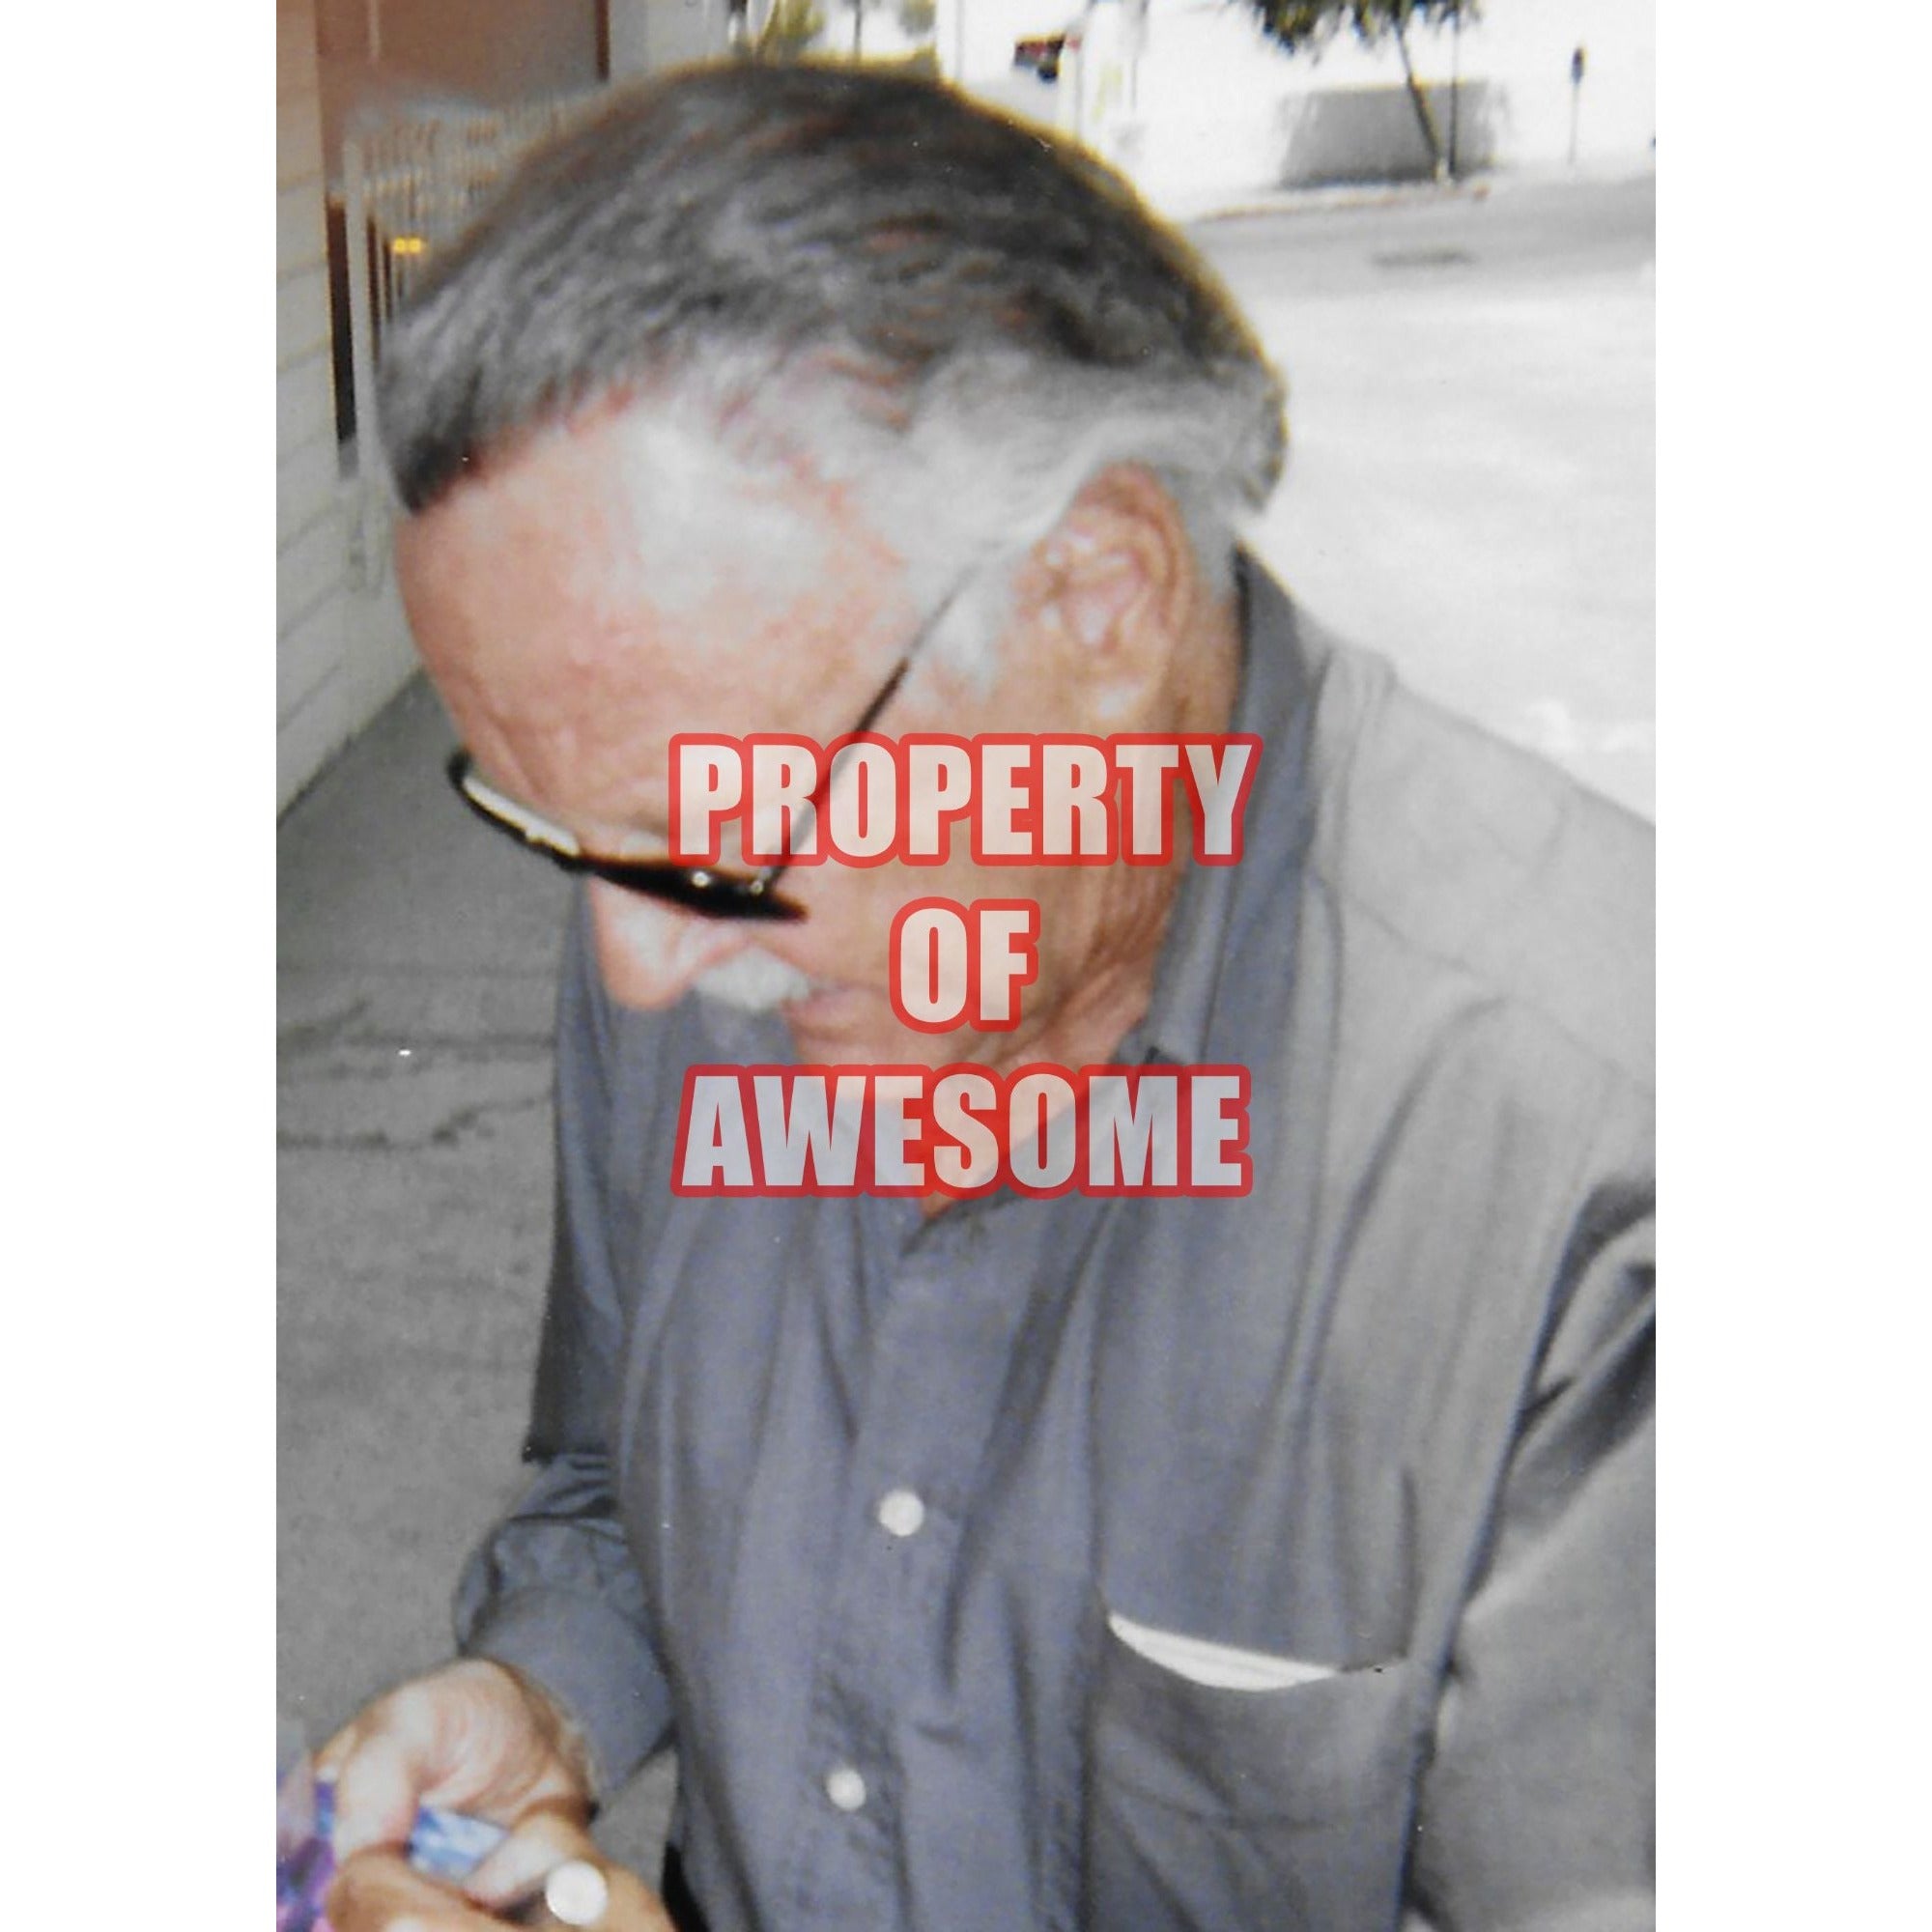 Stan Lee Marvel creator 8 by 10 sign photo with proof